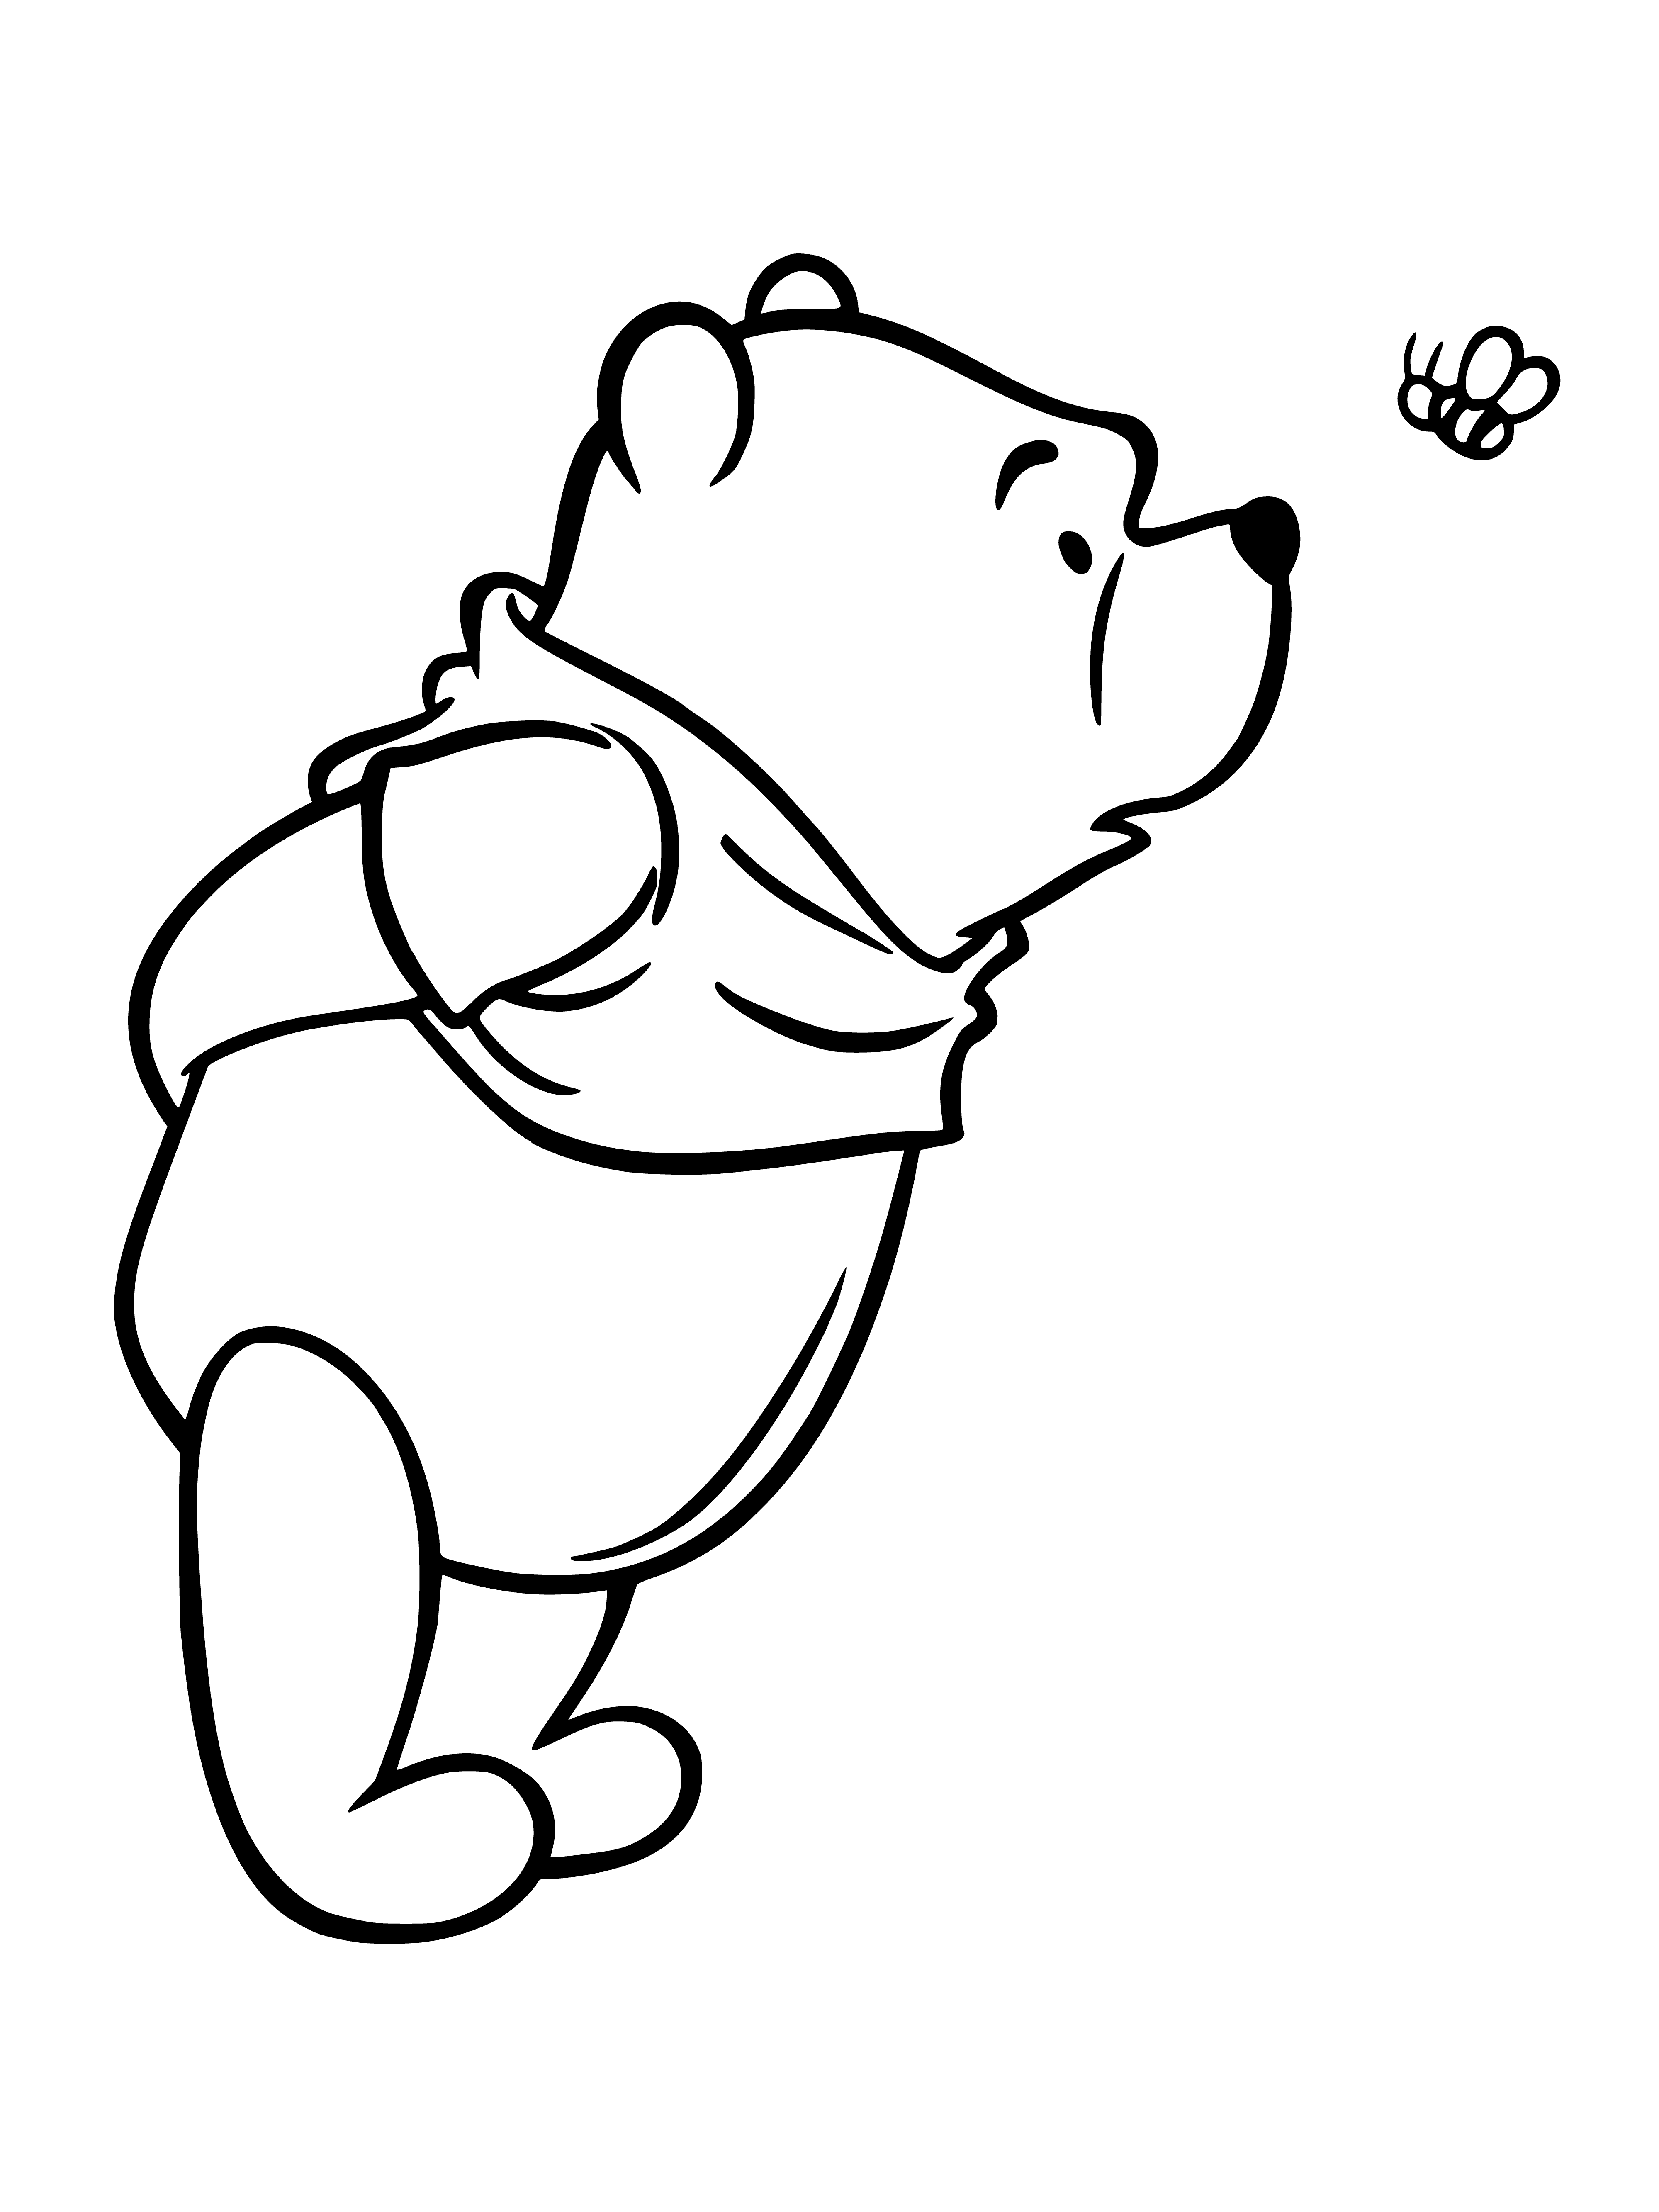 Vinny puzzled coloring page